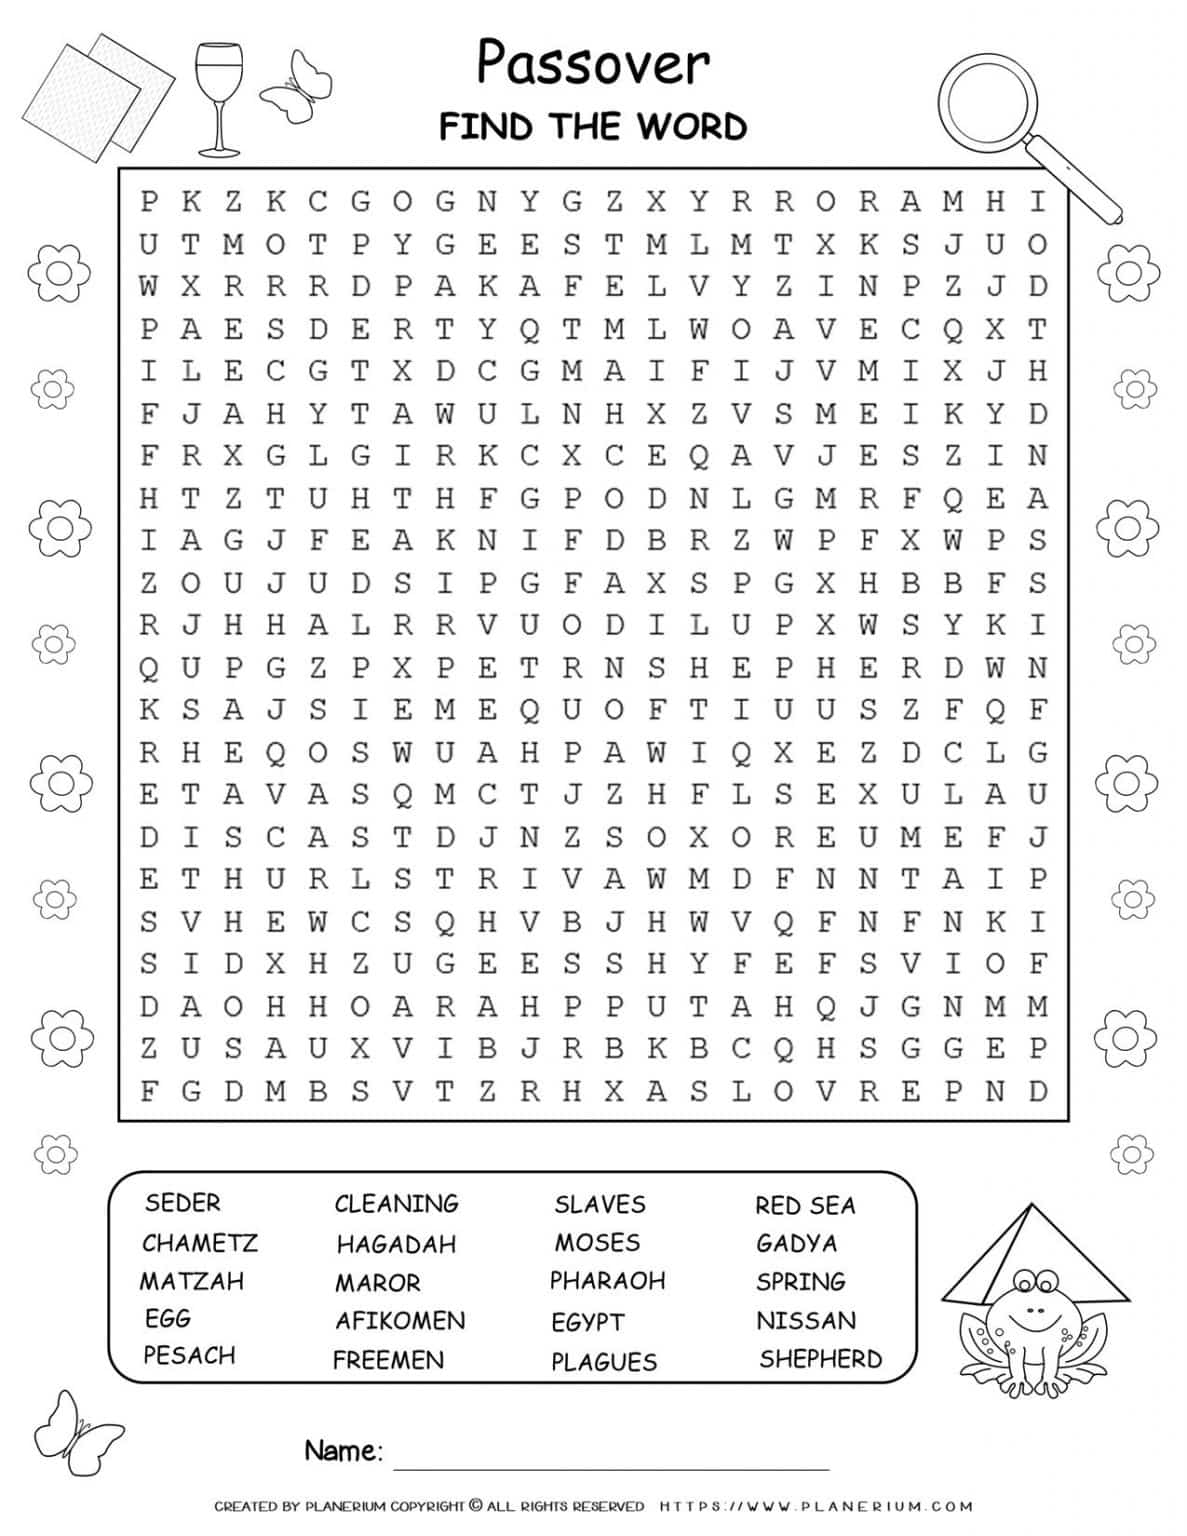 Passover Word Search Puzzle Planerium Passover Worksh - vrogue.co